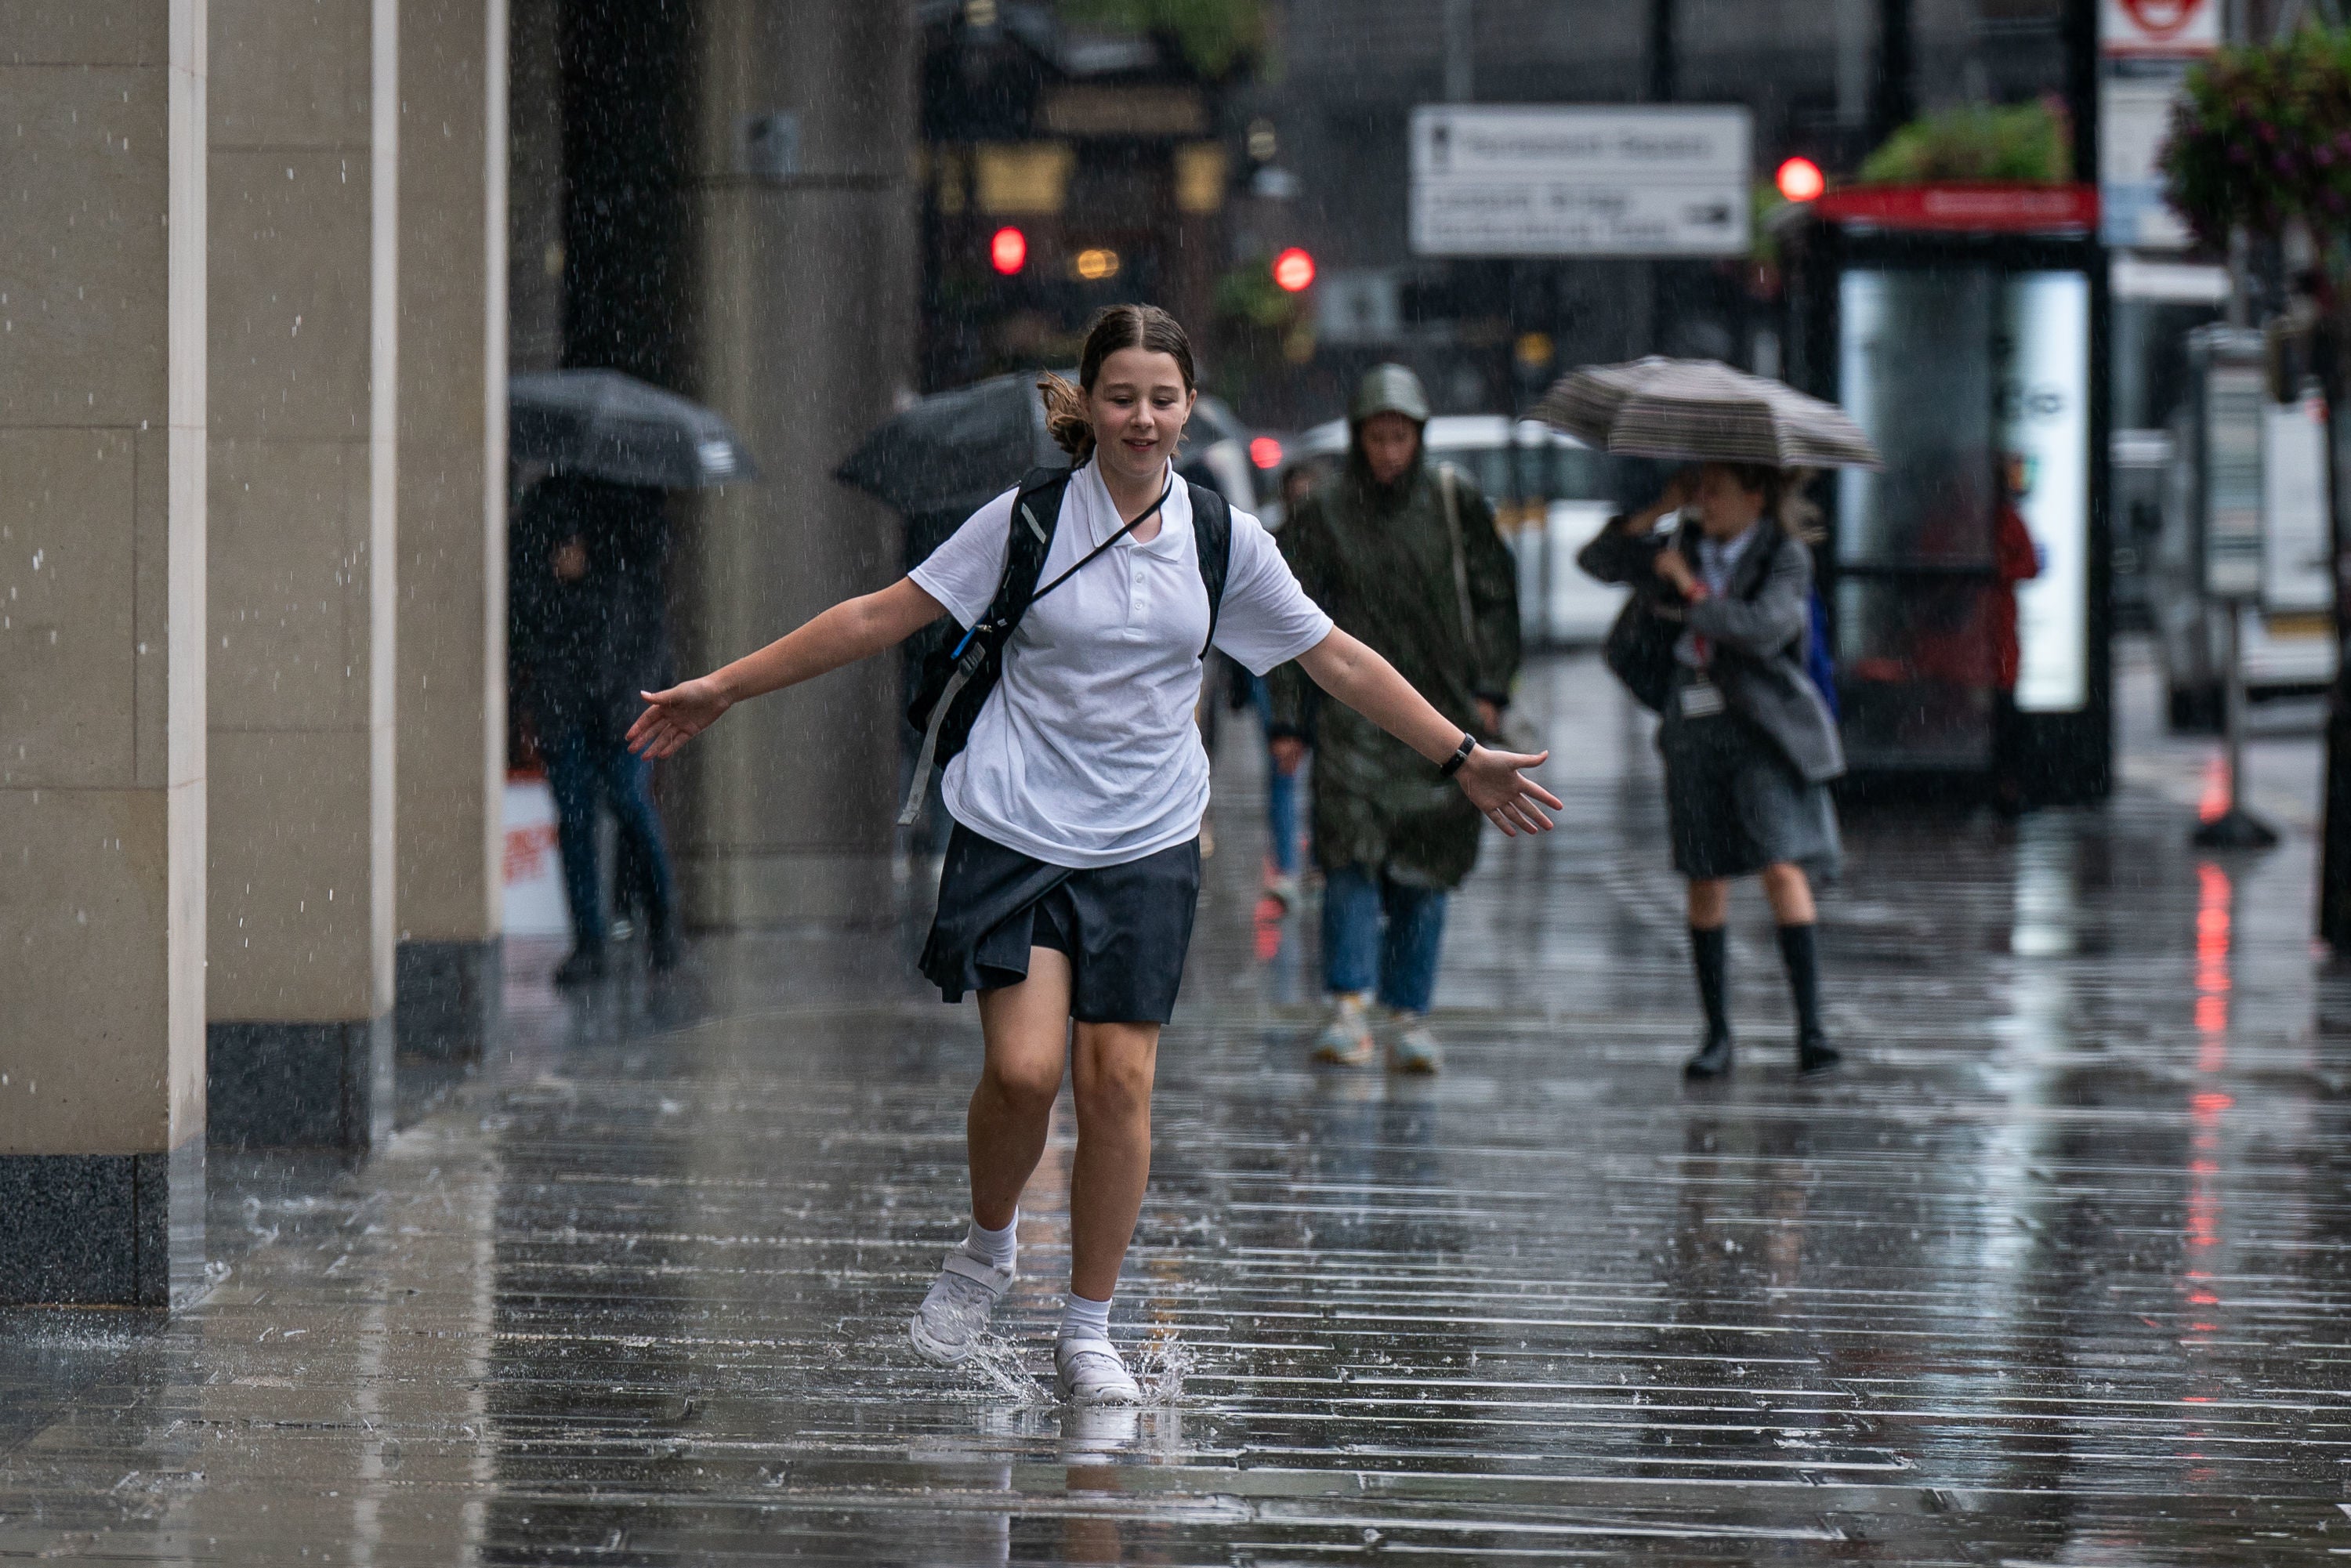 Half an inch of rain fell within ten minutes in some parts of London